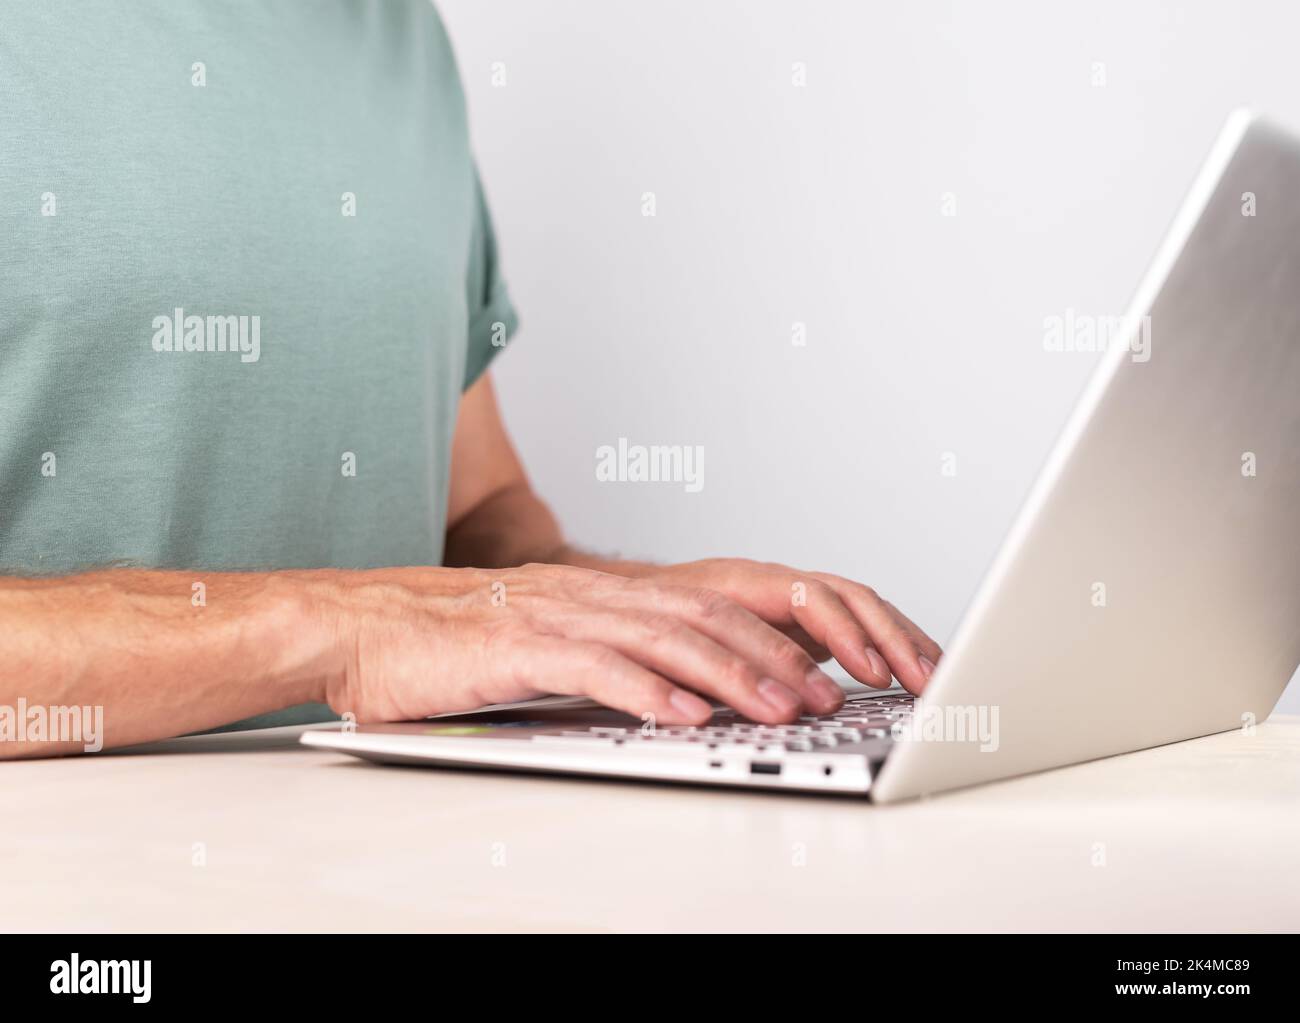 Hands closeup, typing, writing letter on laptop computer keyboard. Arms at PC on desk closeup. High quality photo Stock Photo